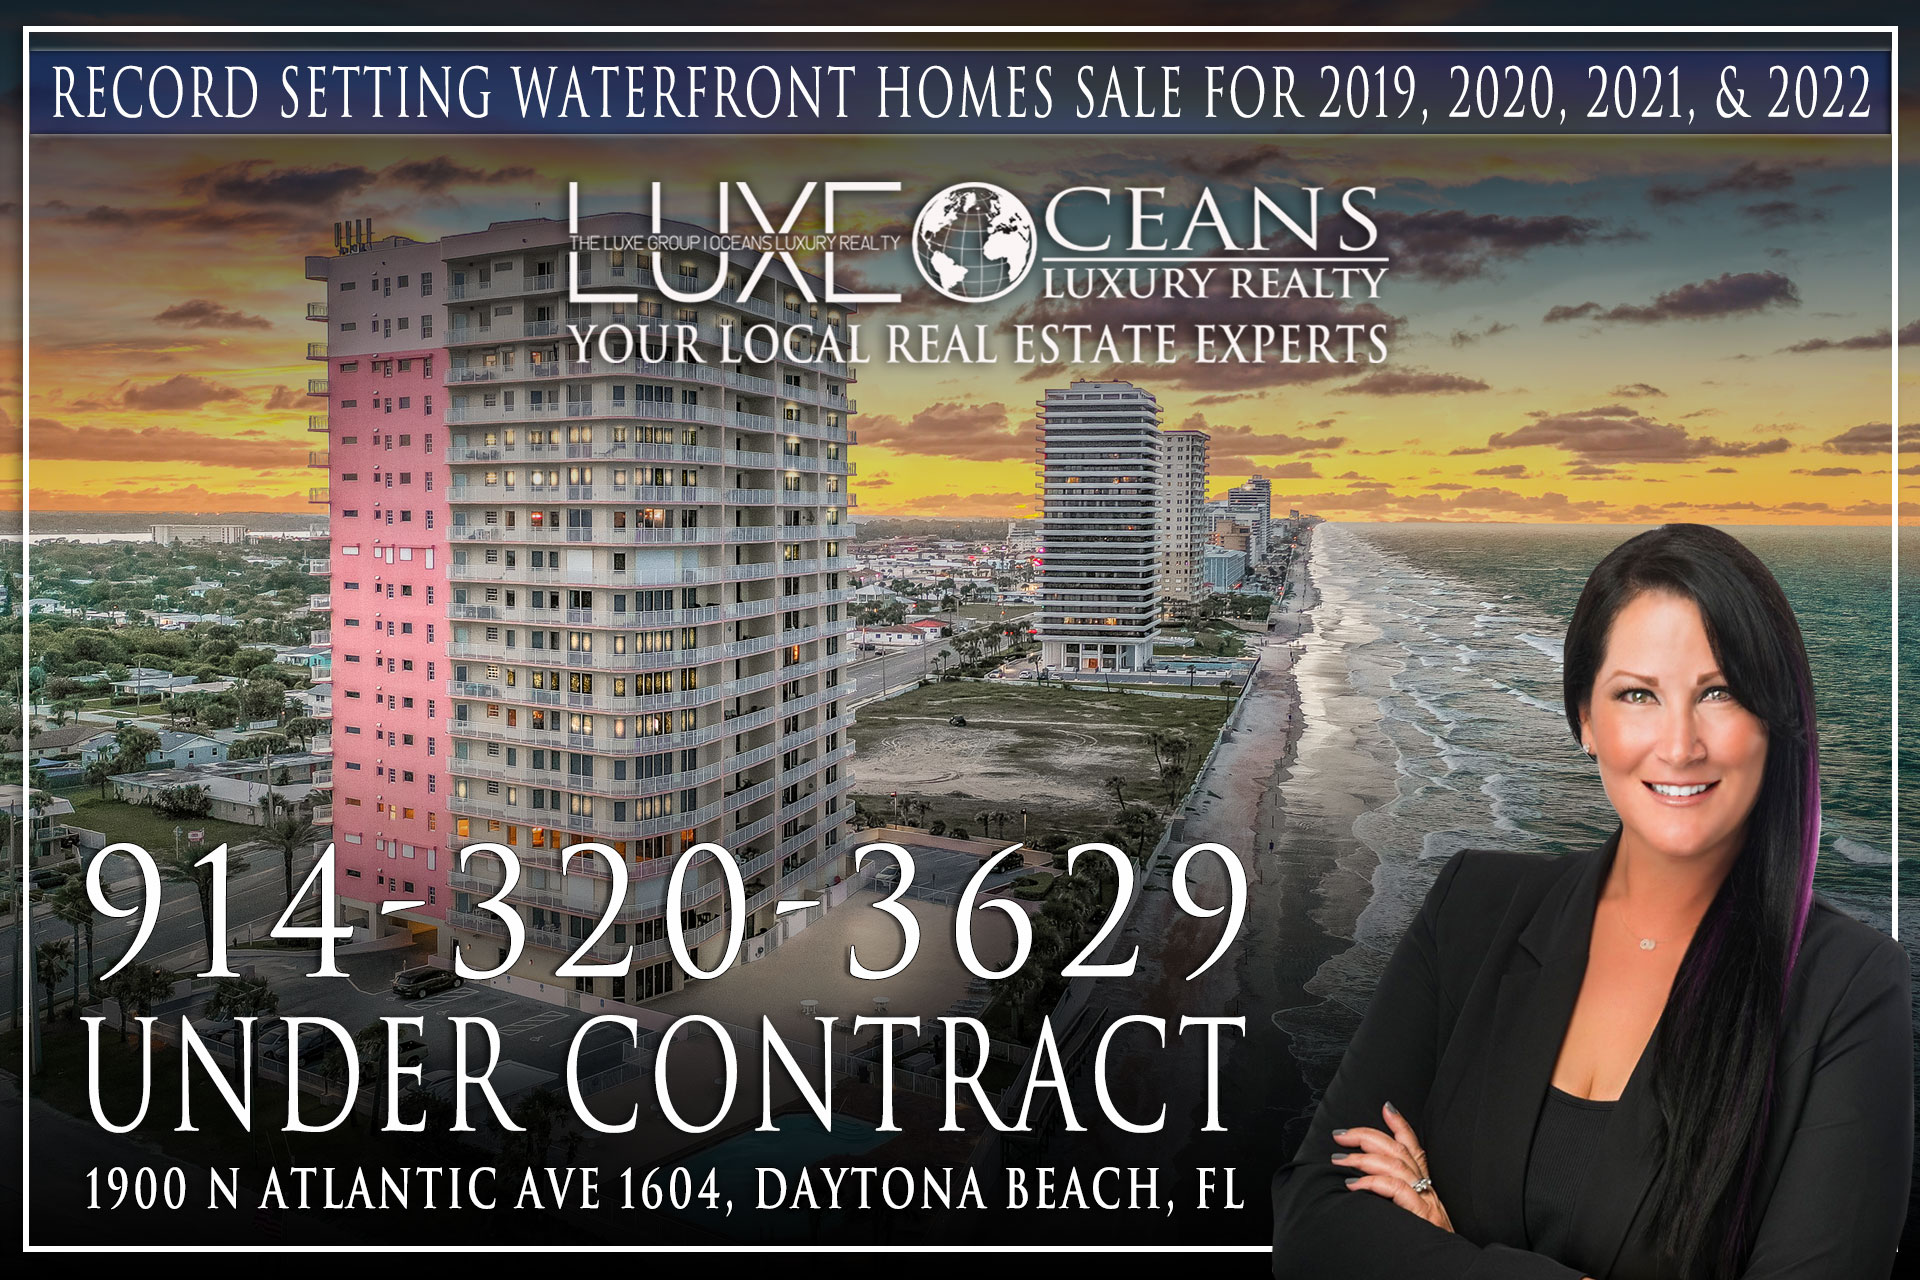 Island Crowne Oceanfront Condos Sale. Luxury Daytona Beach Florida Condos. 1900 N. Atlantic Ave. The LUXE Group at Oceans Luxury Realty 386-299-4043